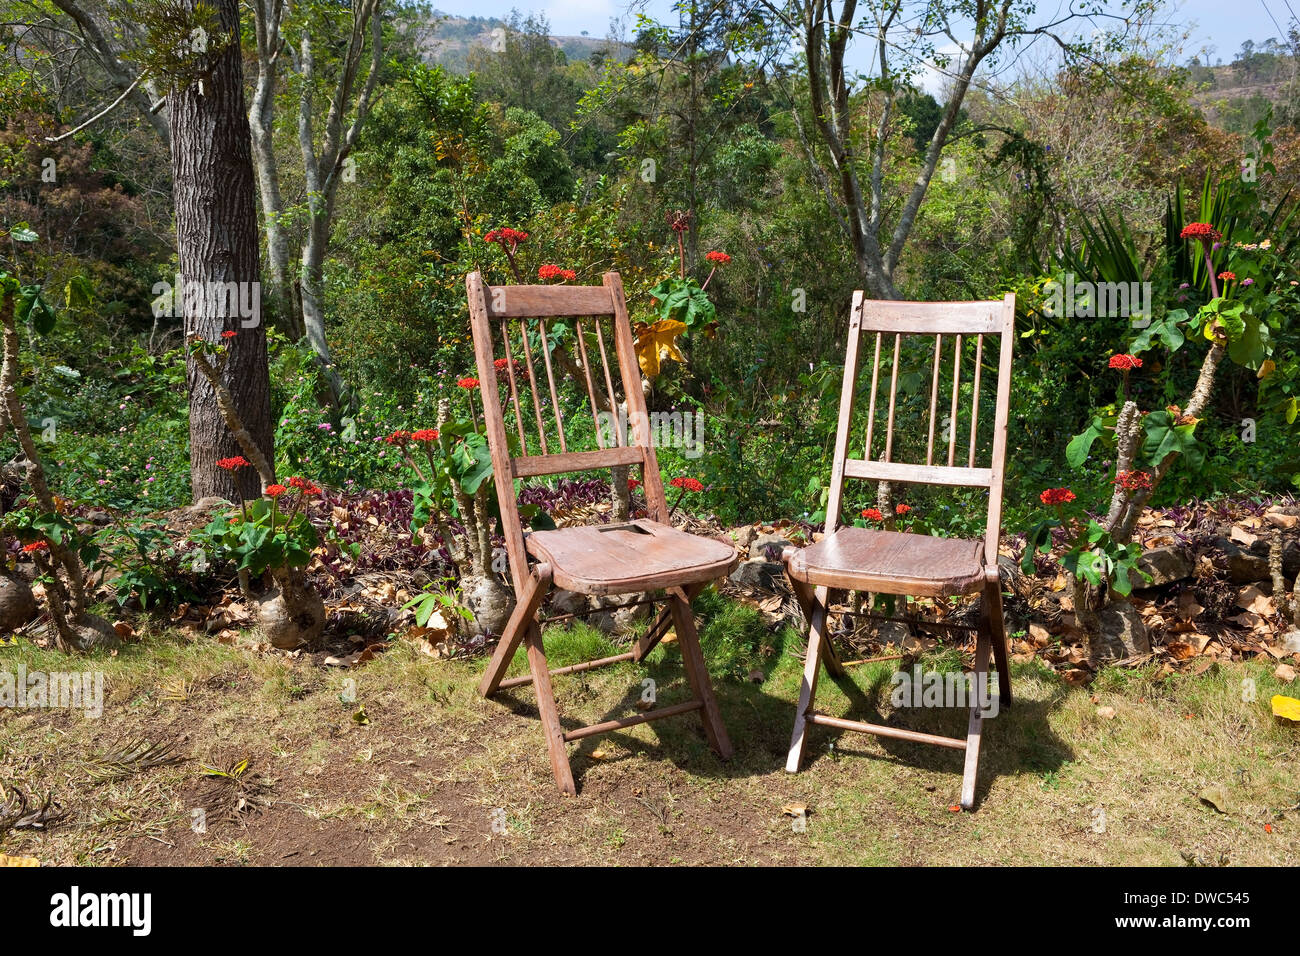 Two rustic wooden chairs in a tropical woodland garden with hills trees and flowers near kodaikanal, Tamil Nadu,  South india. Stock Photo